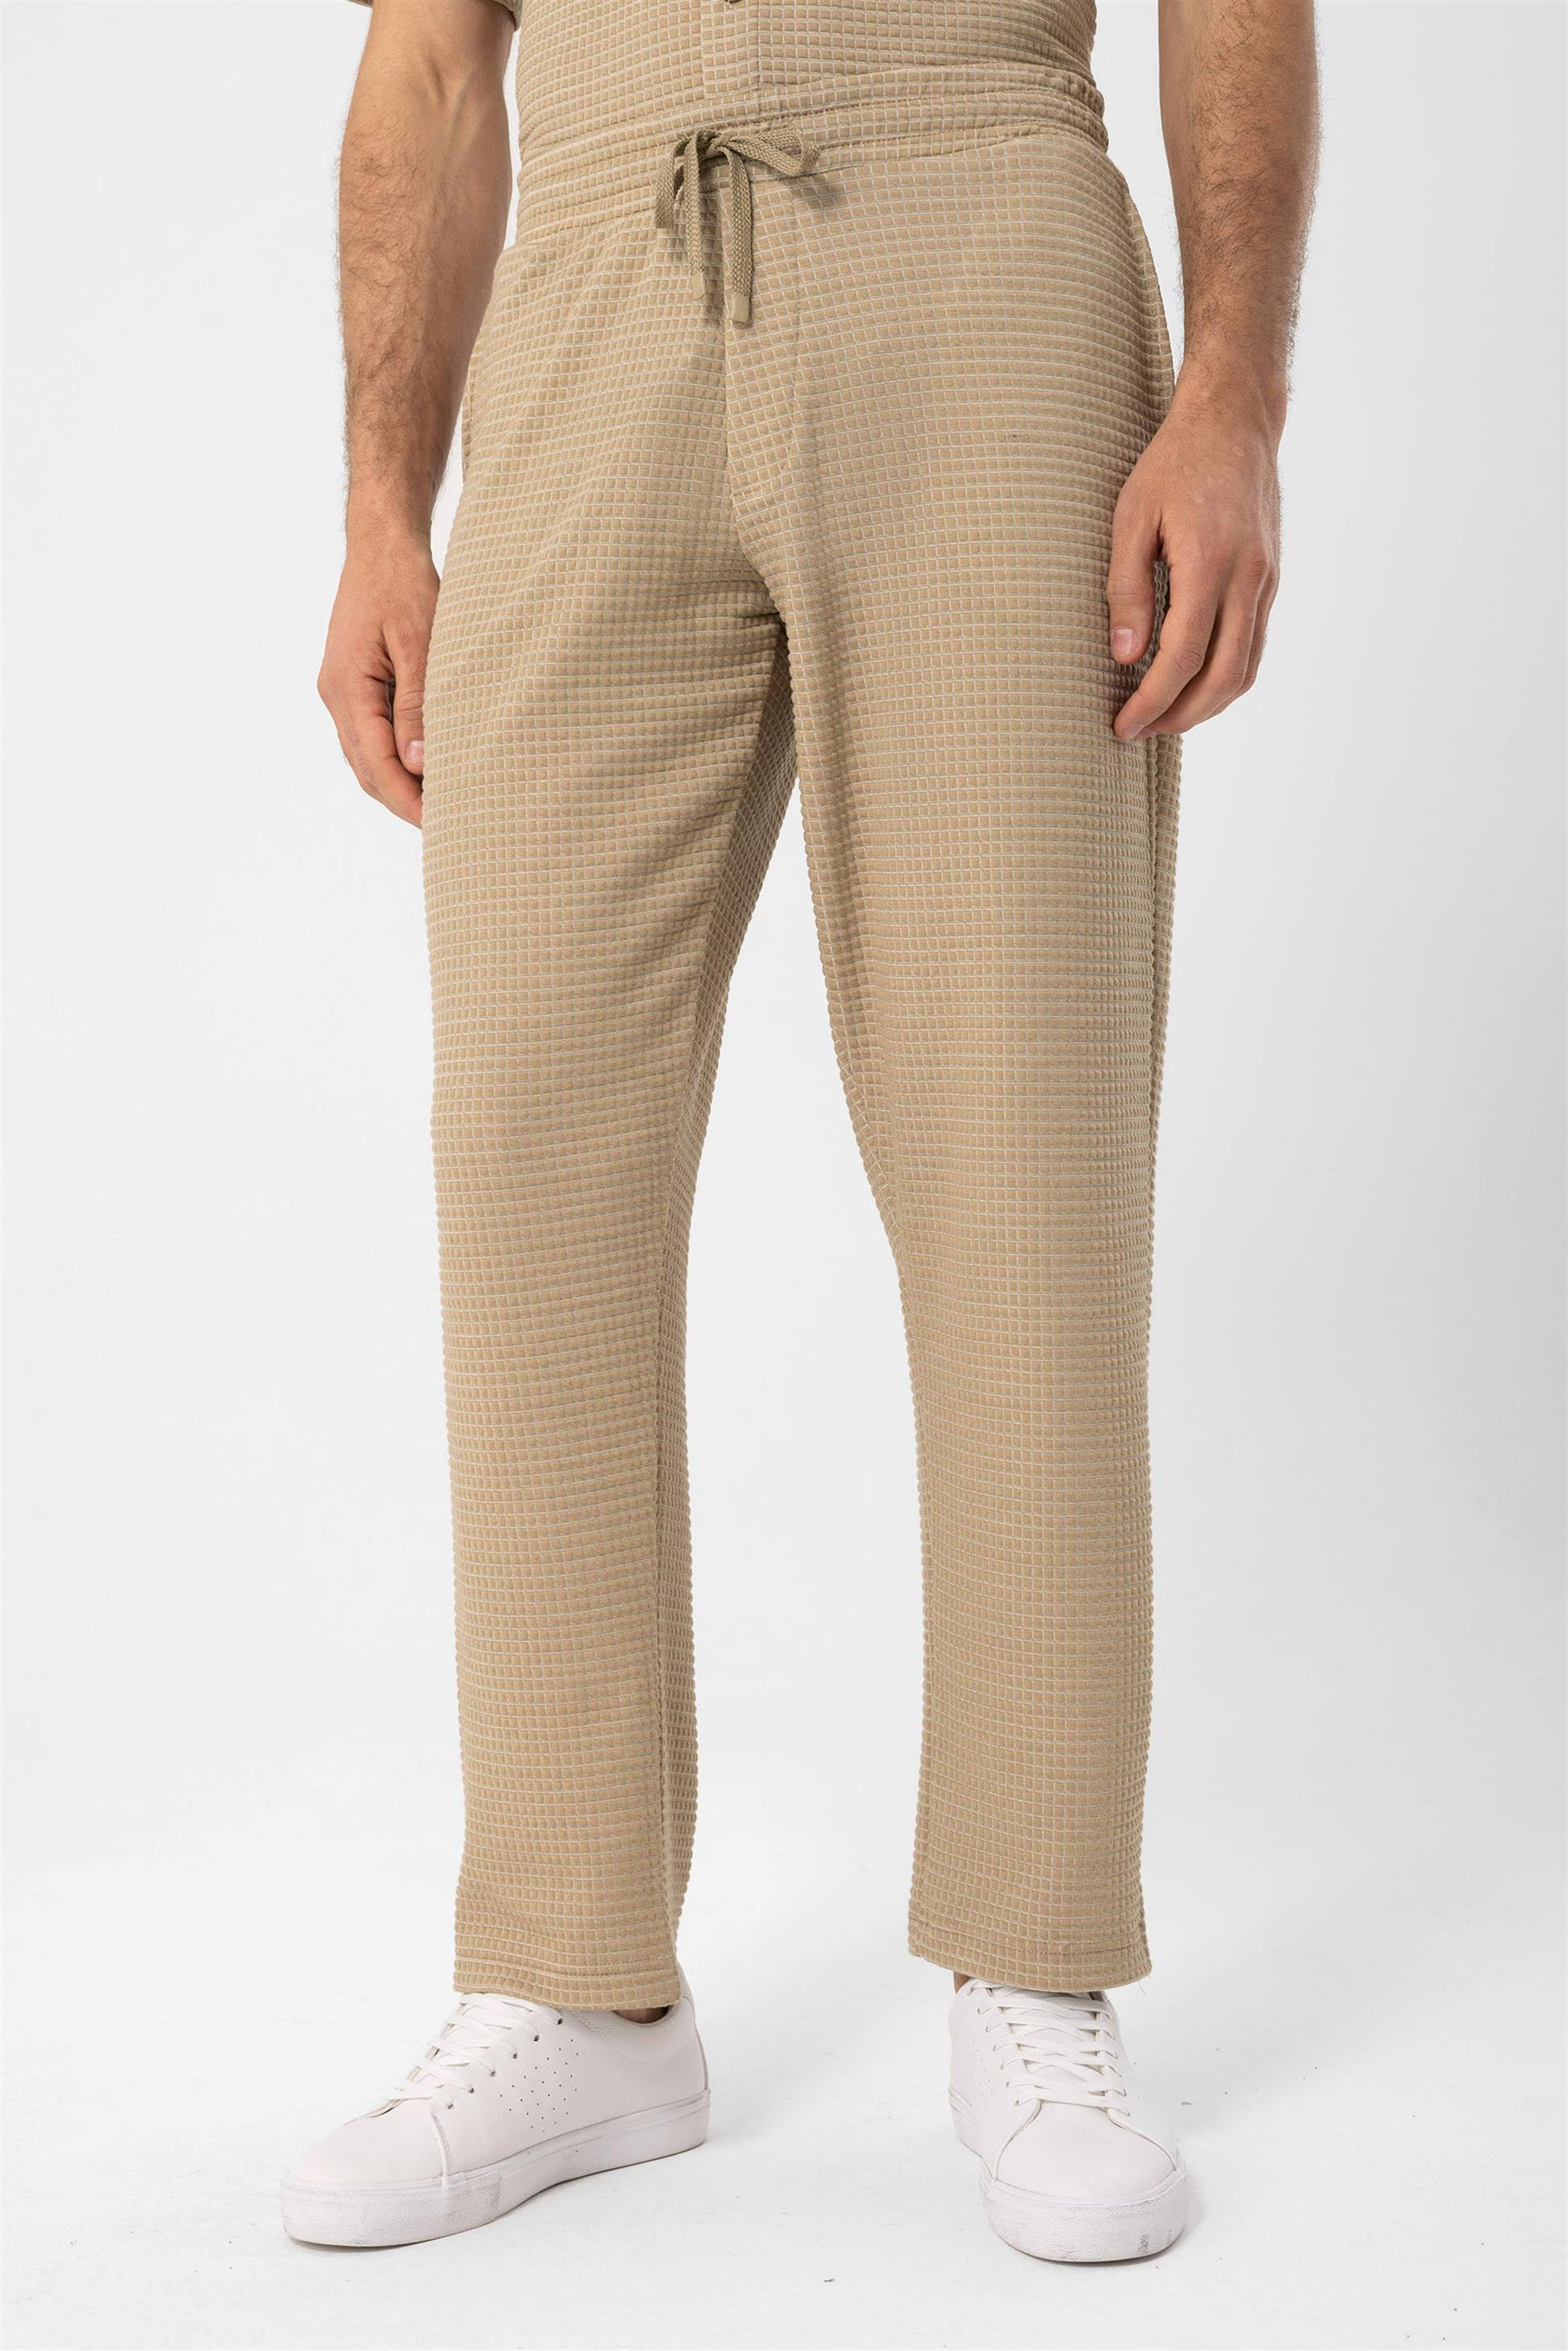 Fabric Patterned Comfortable Fit Men's Trousers